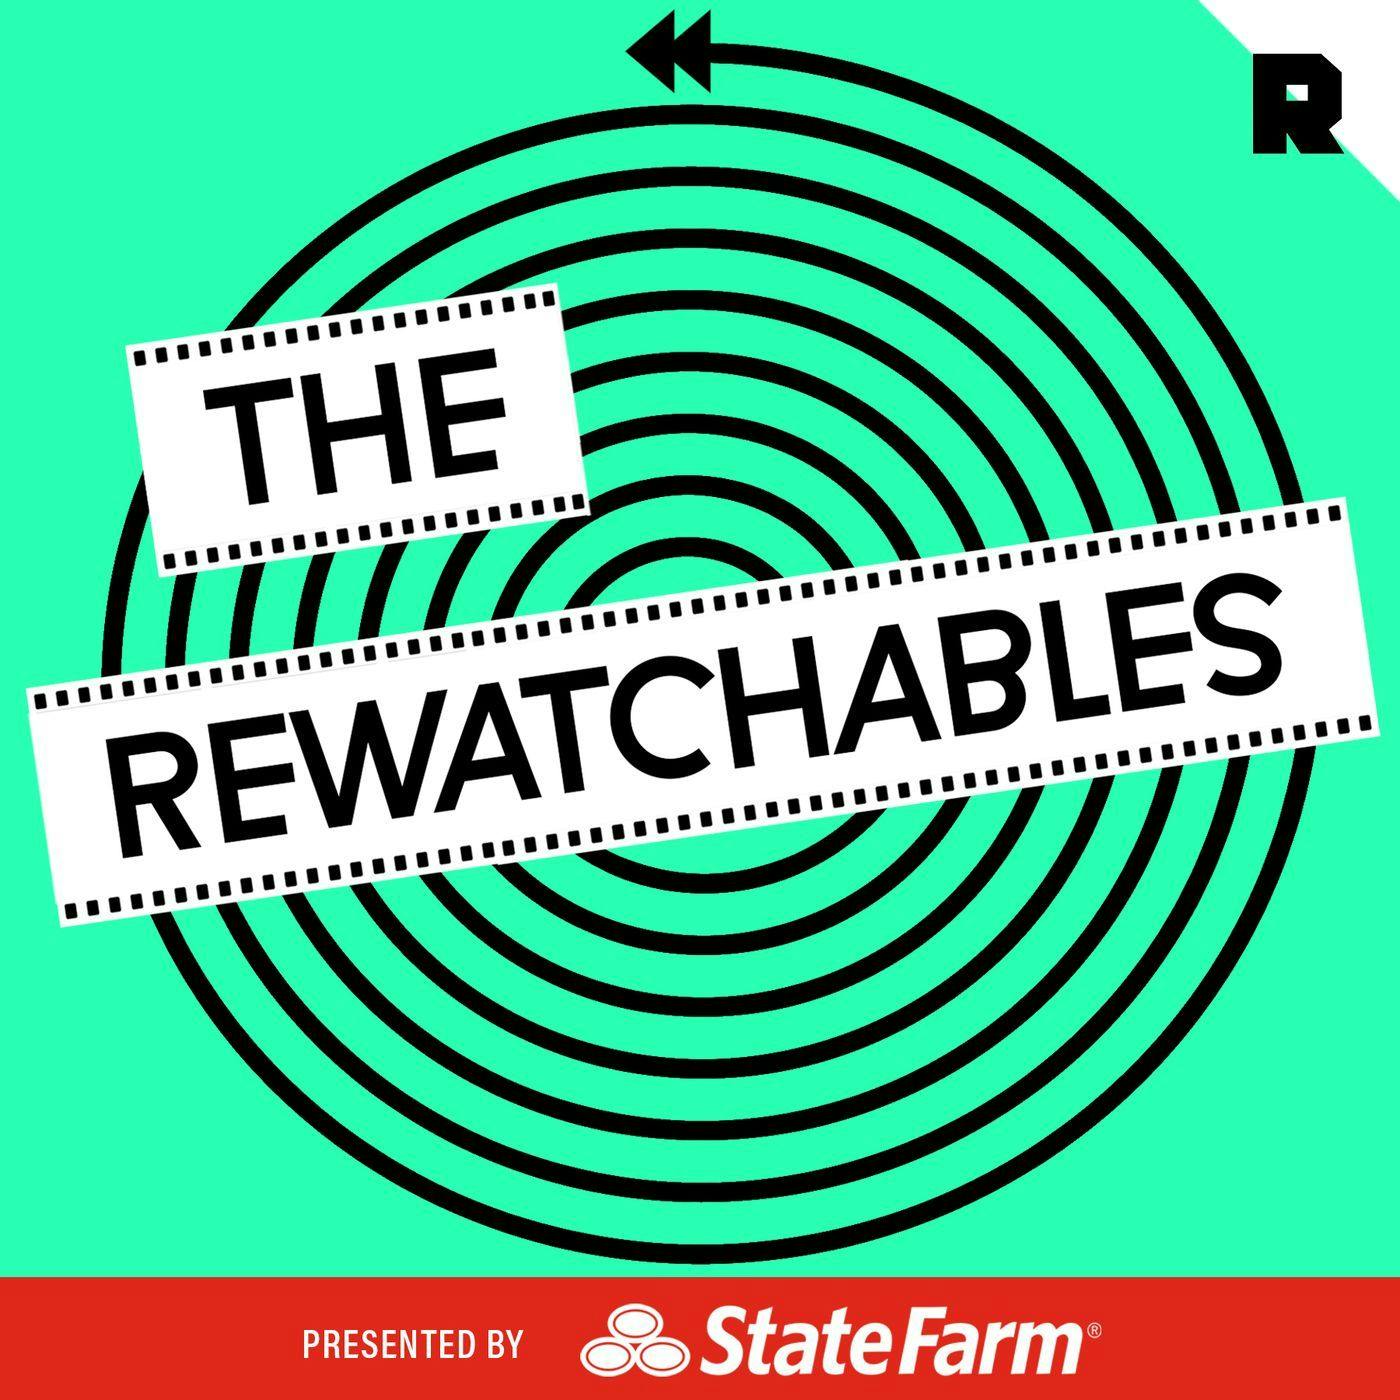 'The Fugitive' With Bill Simmons, Chris Ryan, and Andy Greenwald